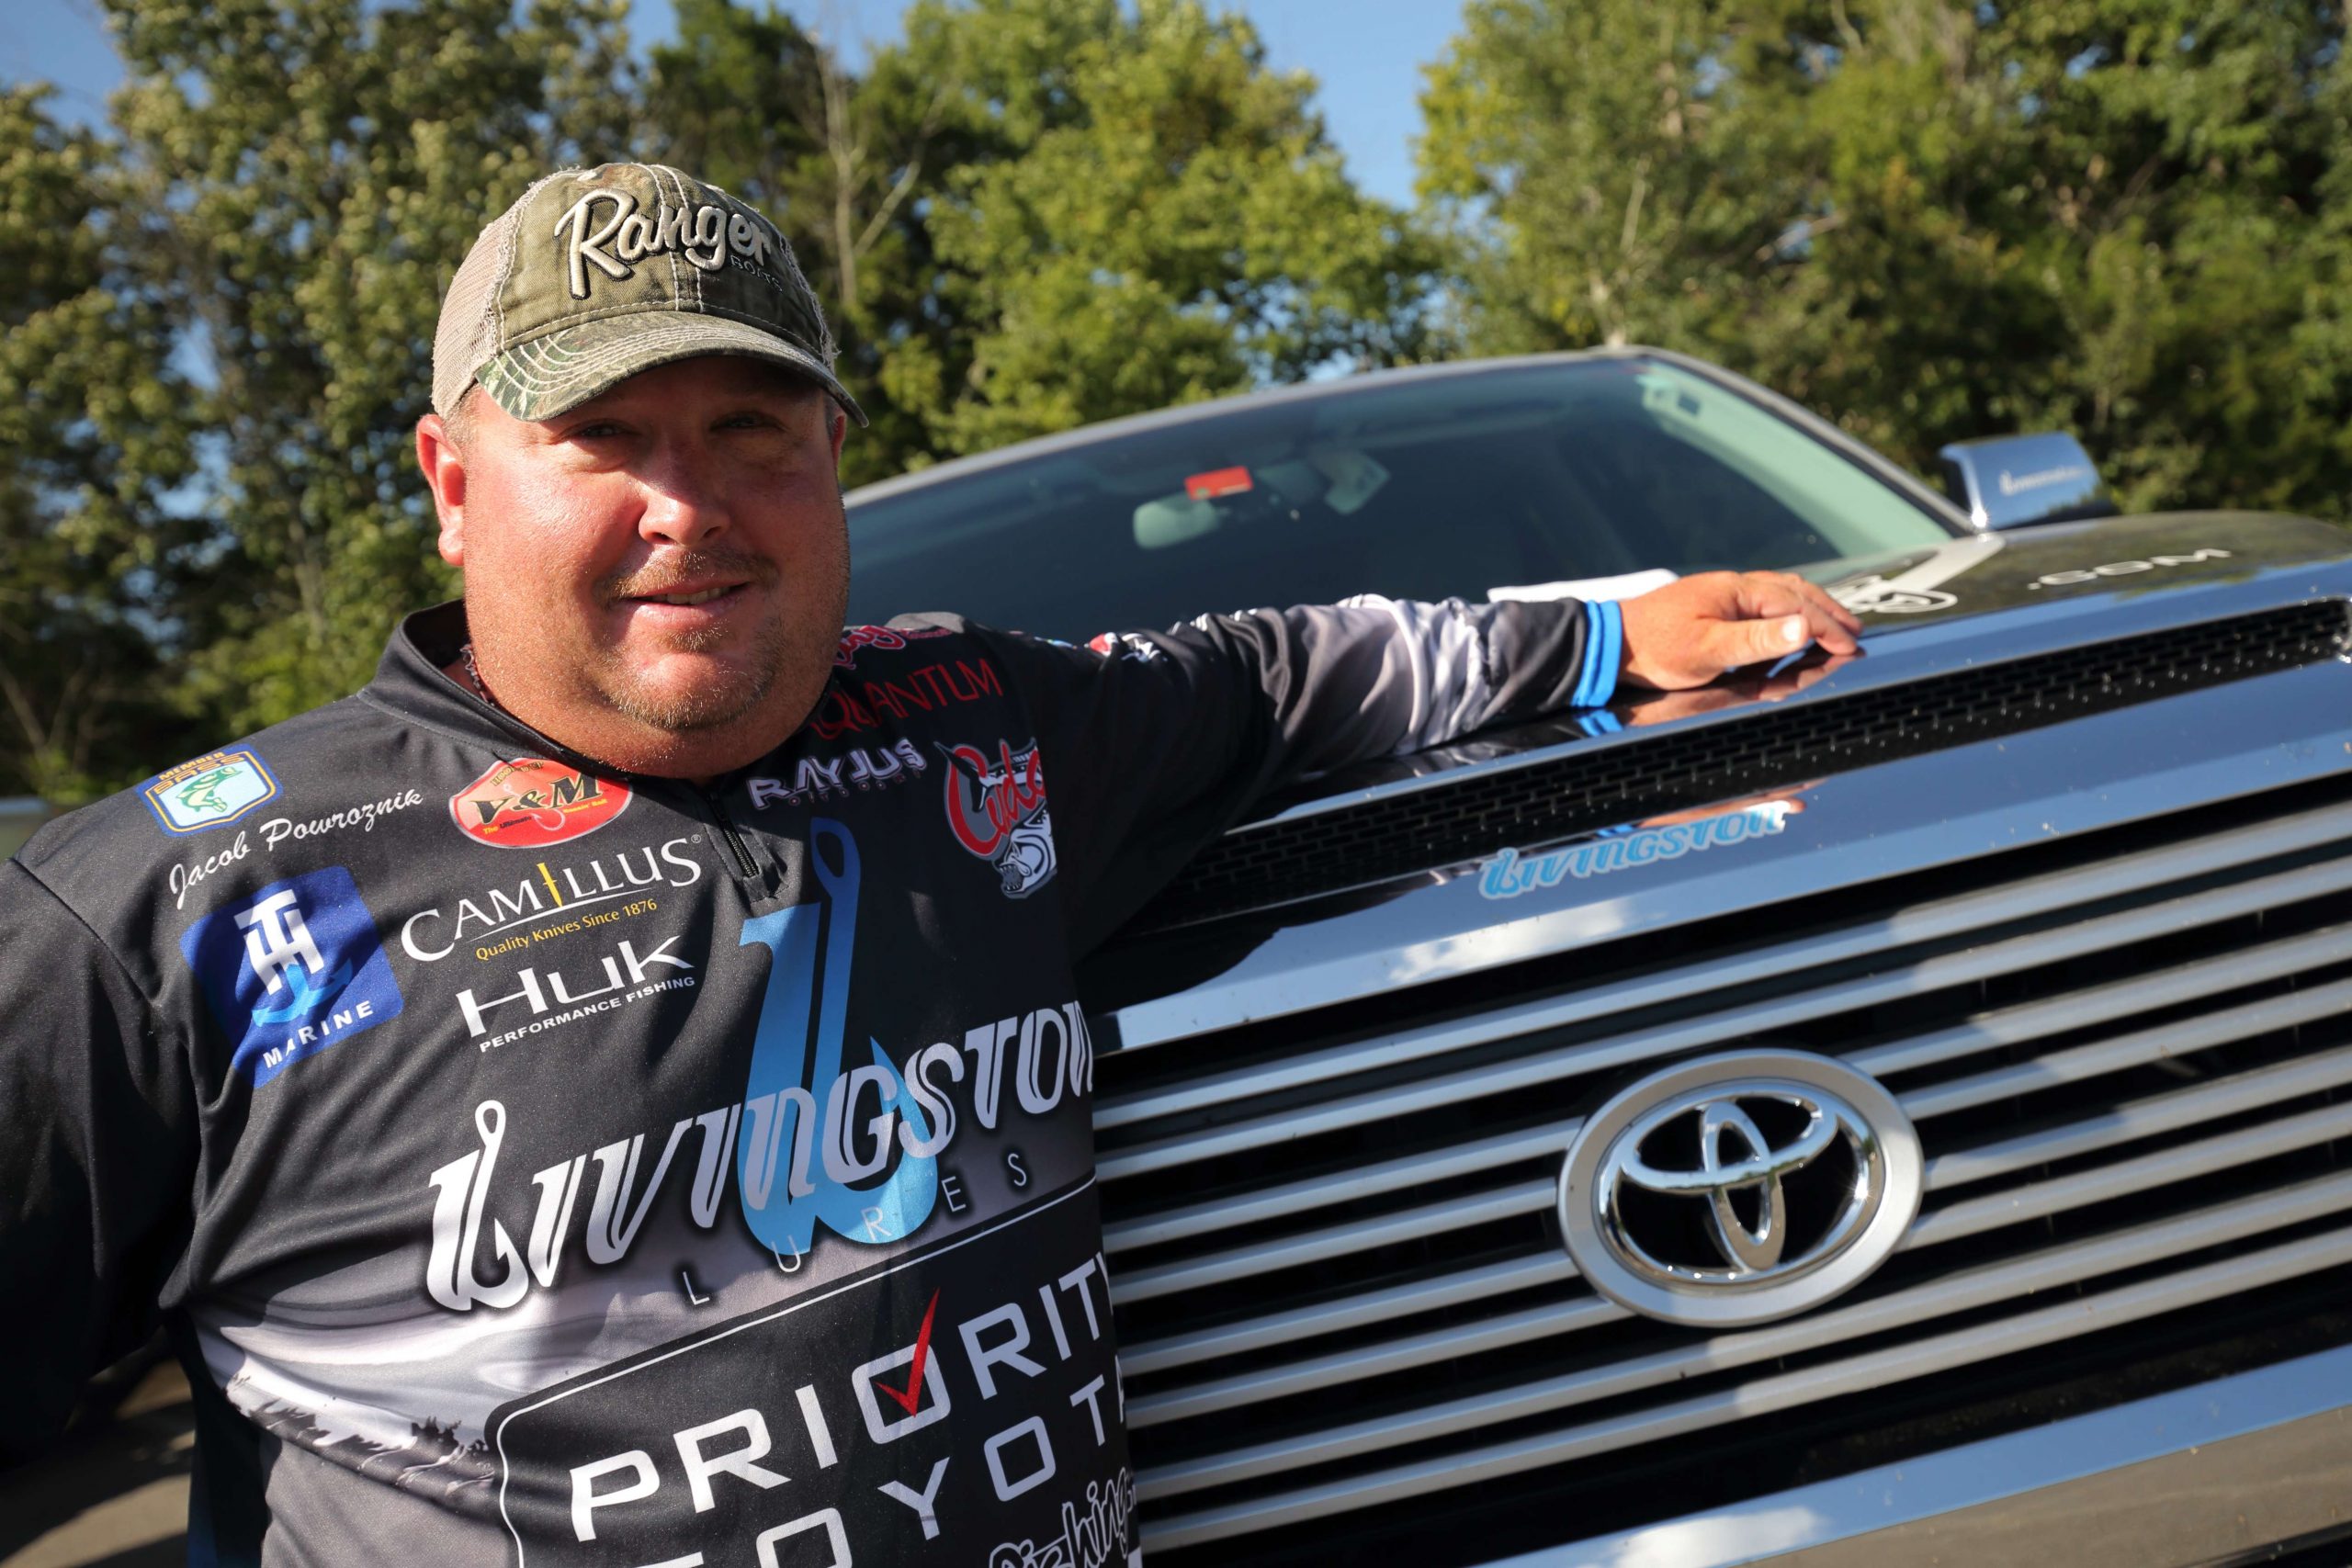 2014 #Bassmaster Rookie of the Year Jacob Powroznik  is regarded as one of the most talented, up-and-coming anglers on the Bassmaster Elite Series. We toured his 2016 Toyota Tundra Limited Edition provided by his sponsor Priority Toyota.